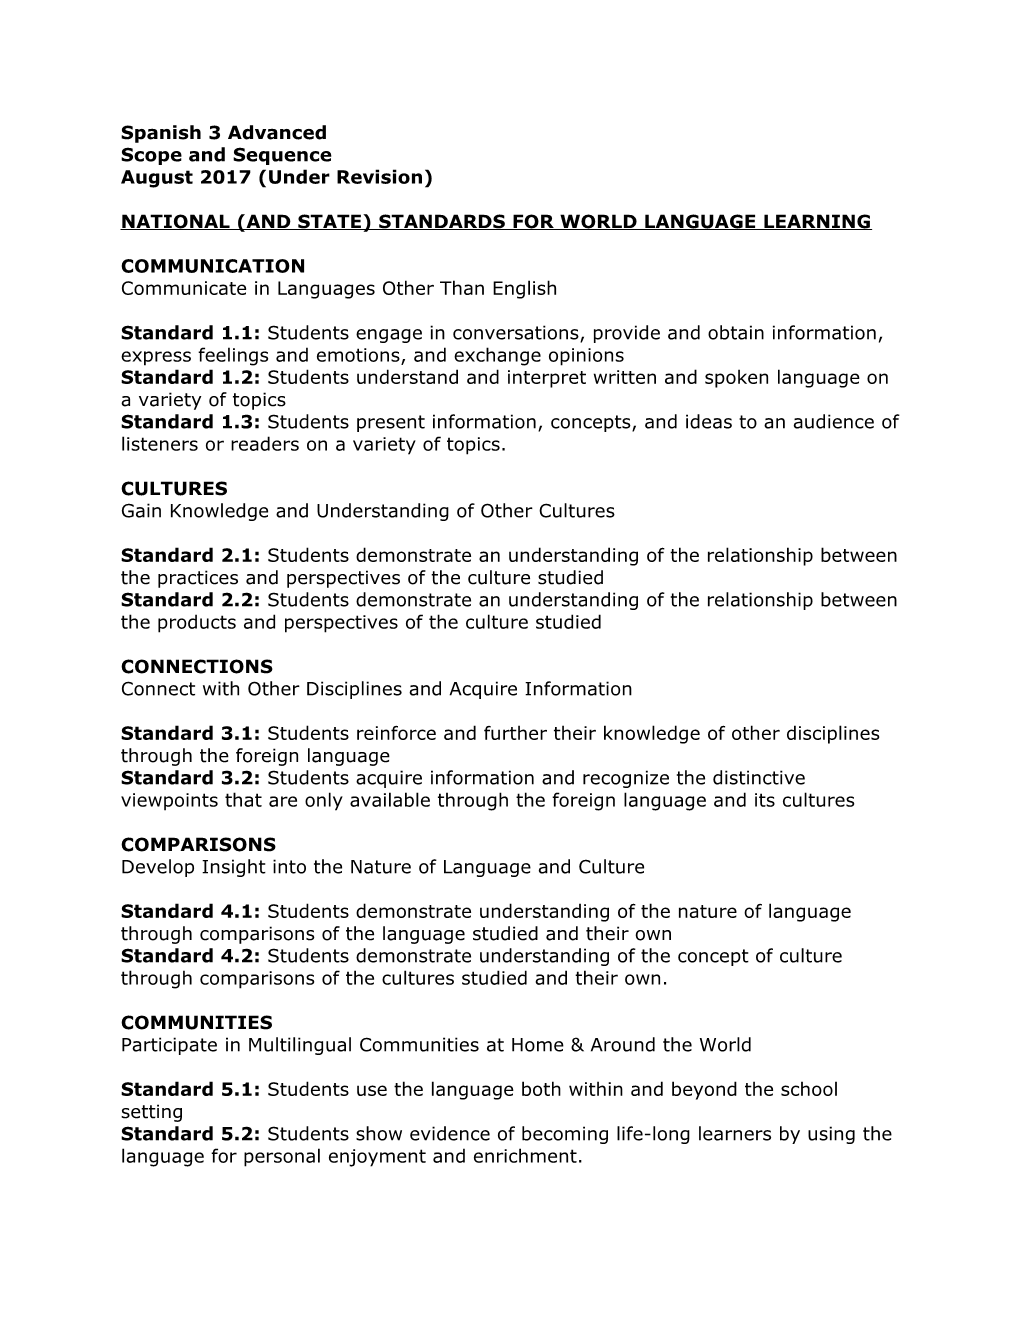 National (And State) Standards for World Language Learning